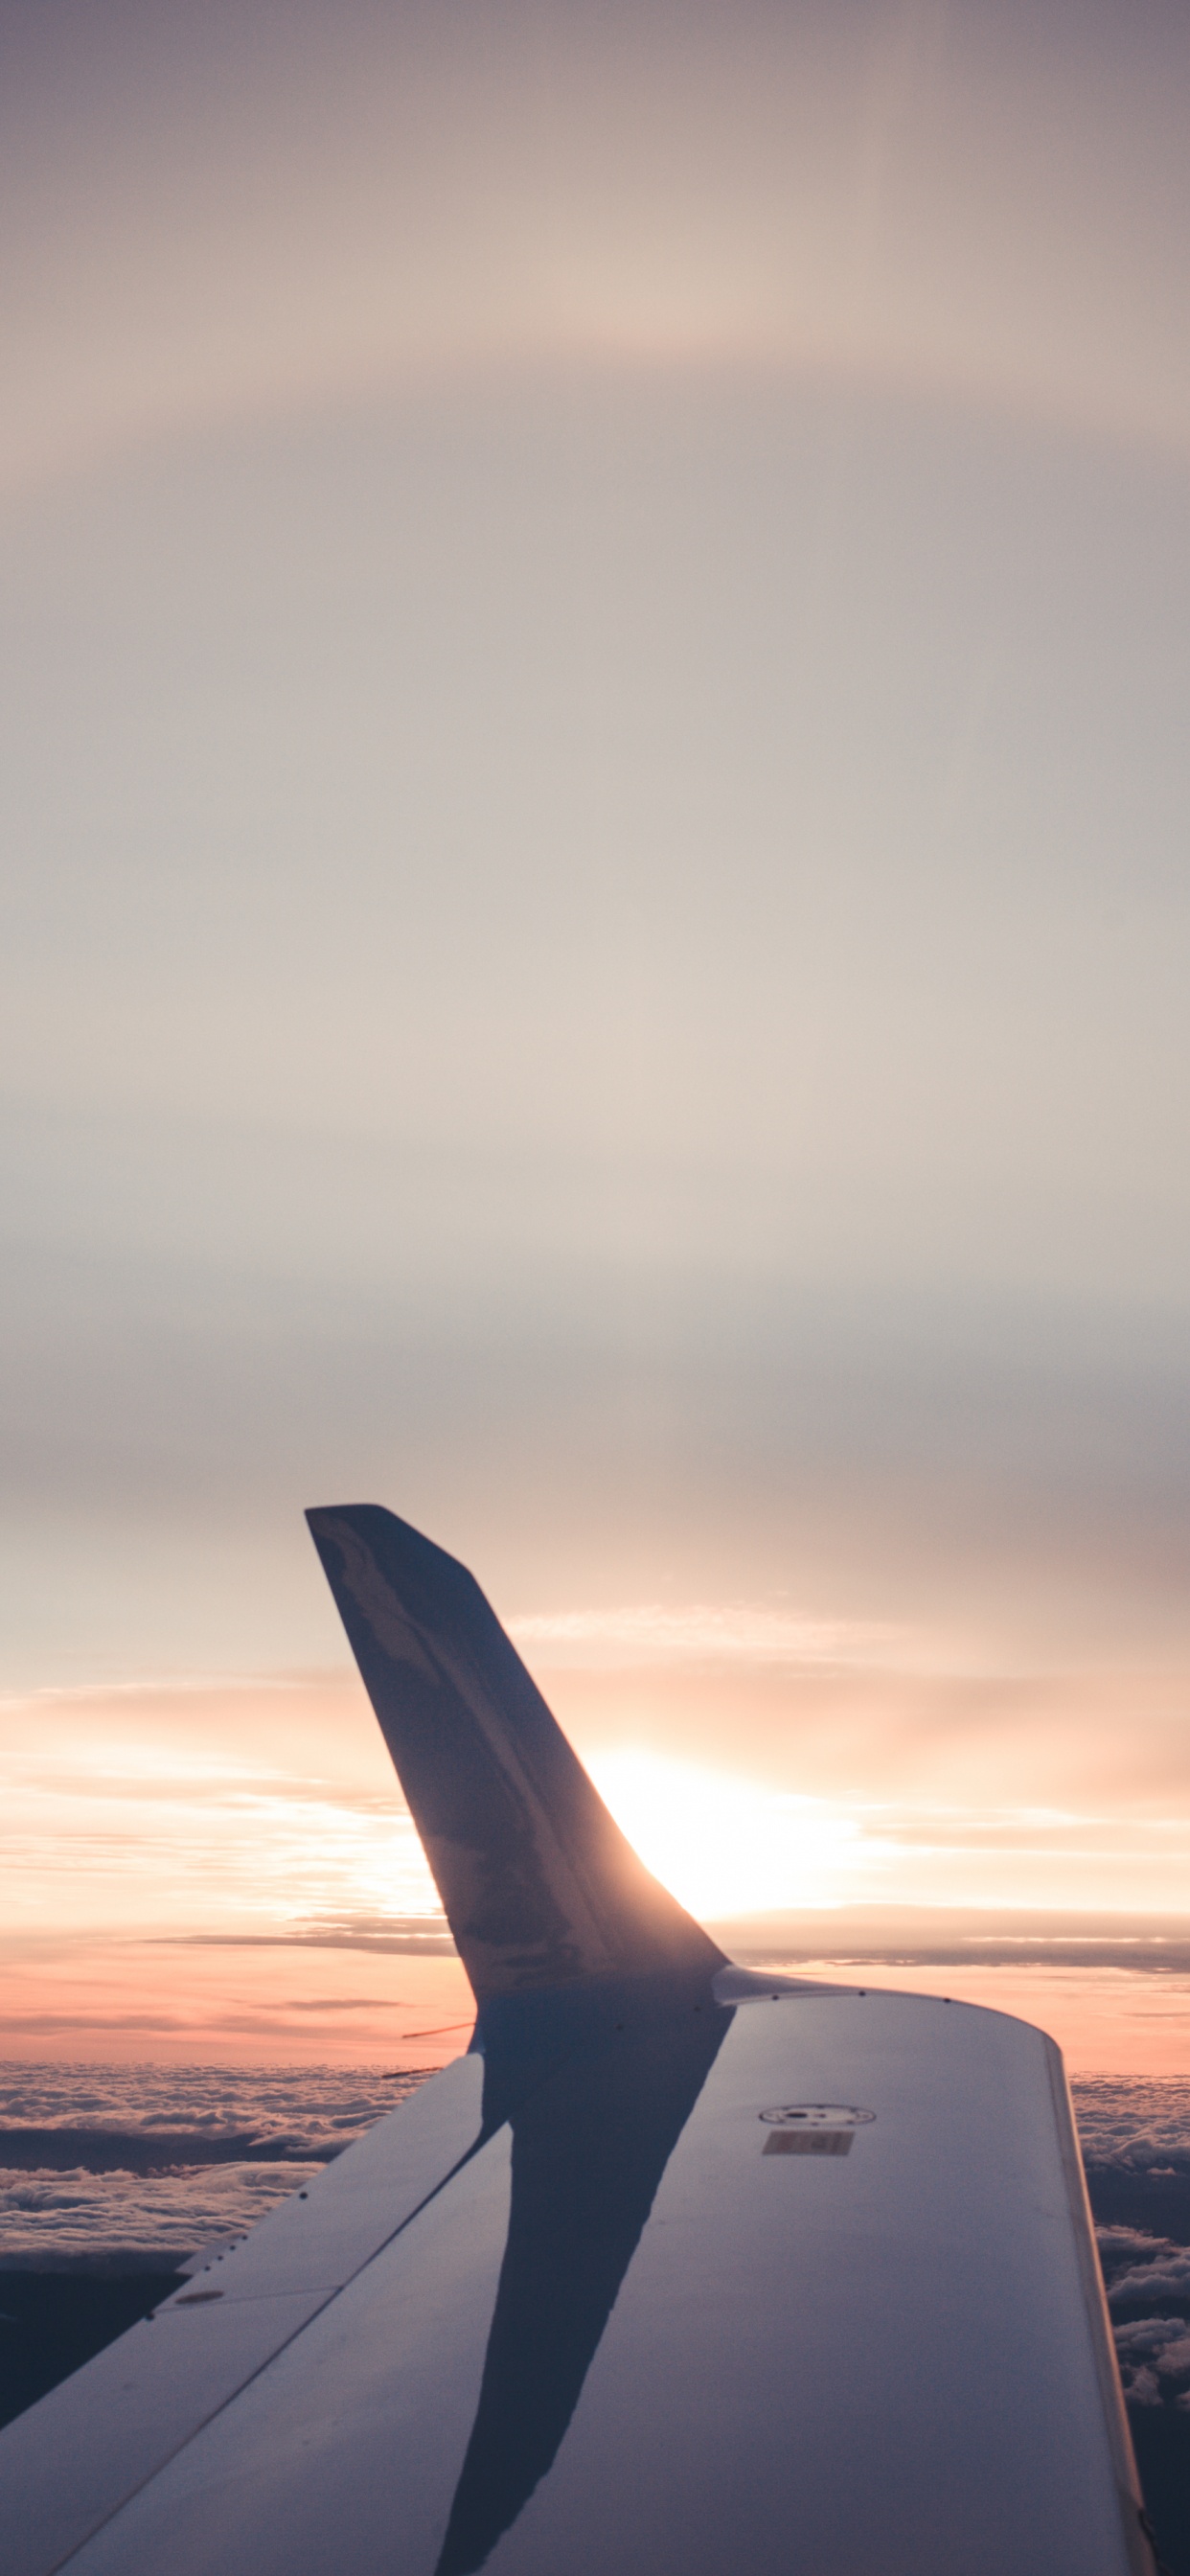 White and Black Airplane Wing During Daytime. Wallpaper in 1242x2688 Resolution